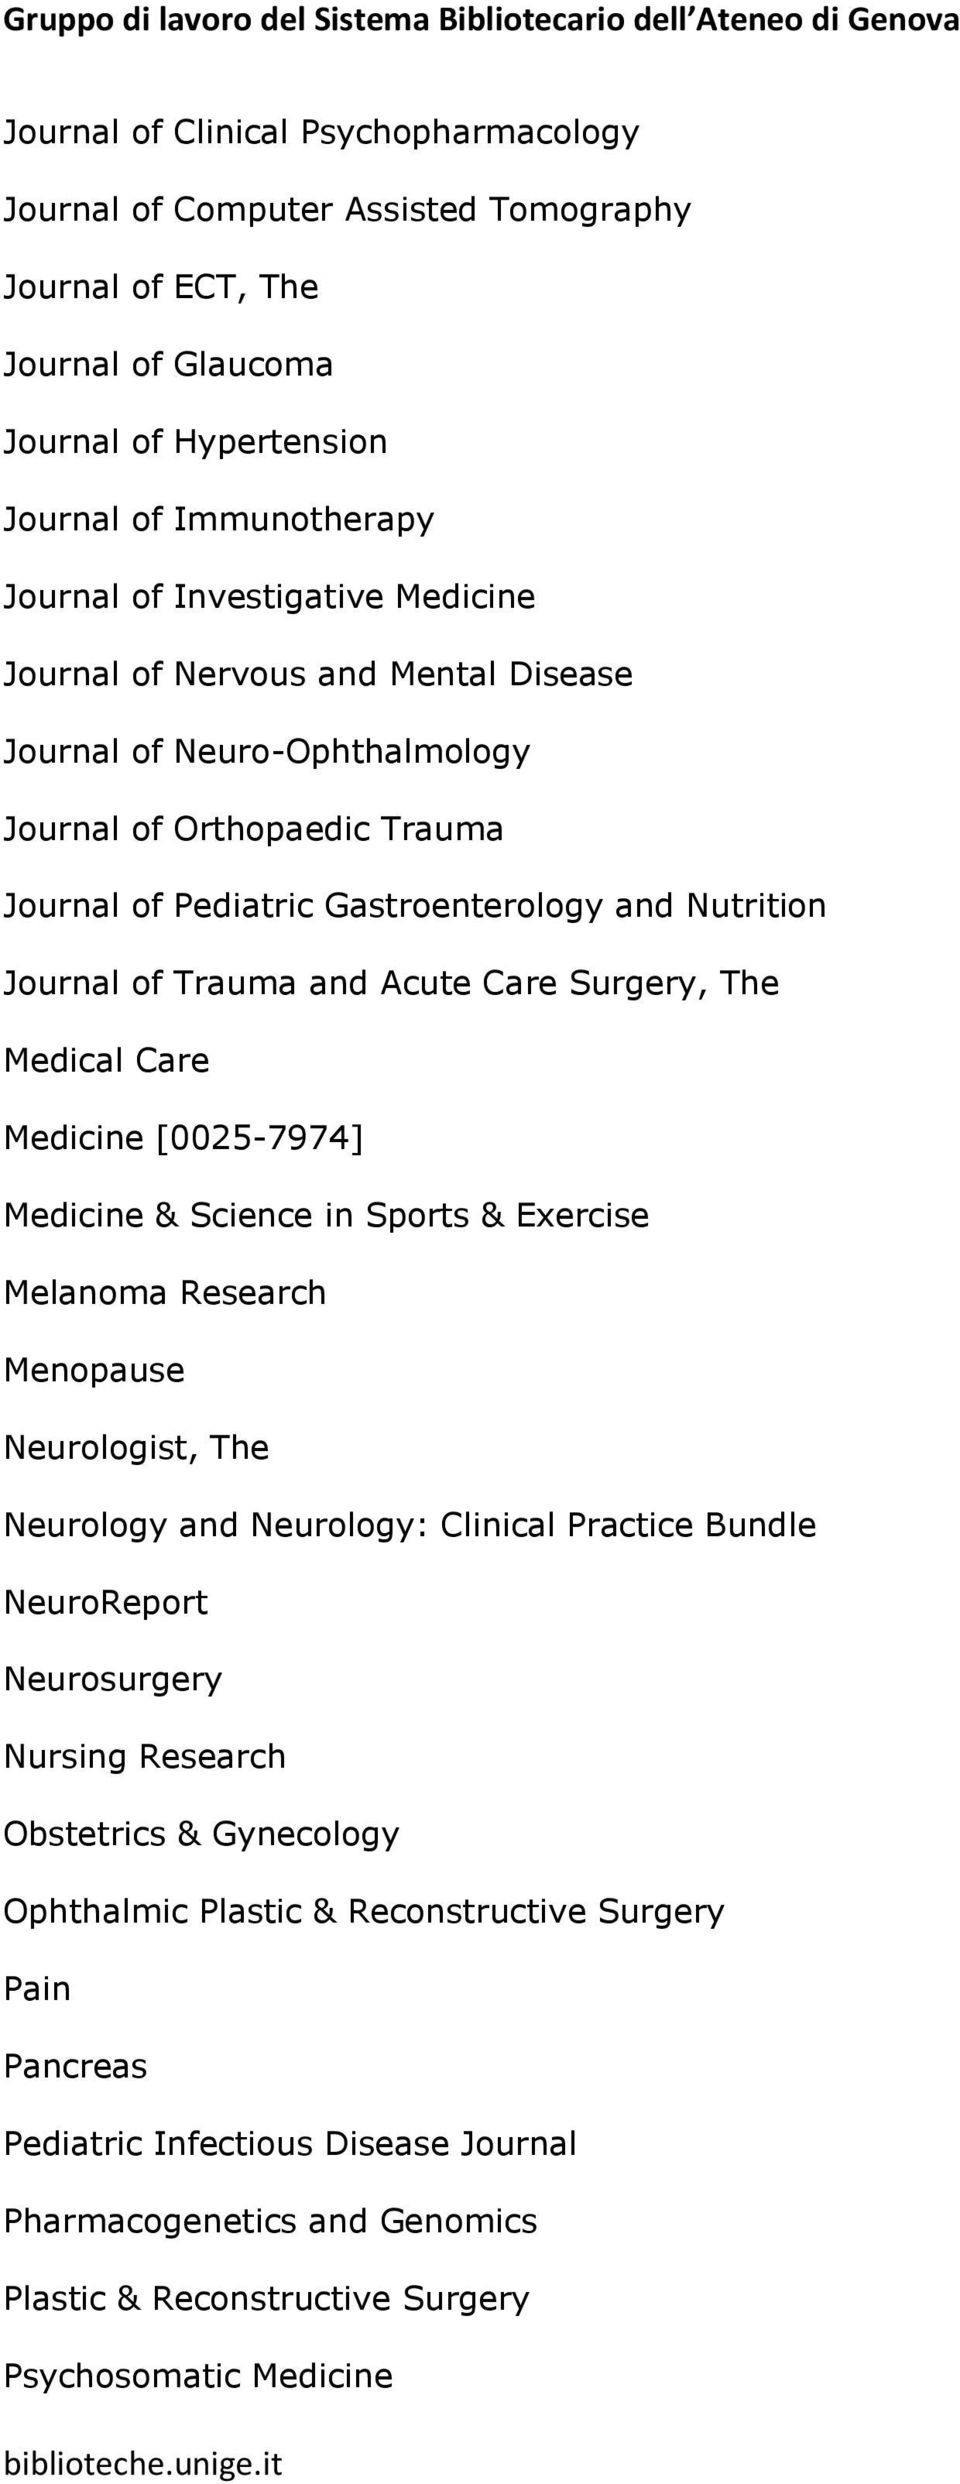 Surgery, The Medical Care Medicine [0025-7974] Medicine & Science in Sports & Exercise Melanoma Research Menopause Neurologist, The Neurology and Neurology: Clinical Practice Bundle NeuroReport